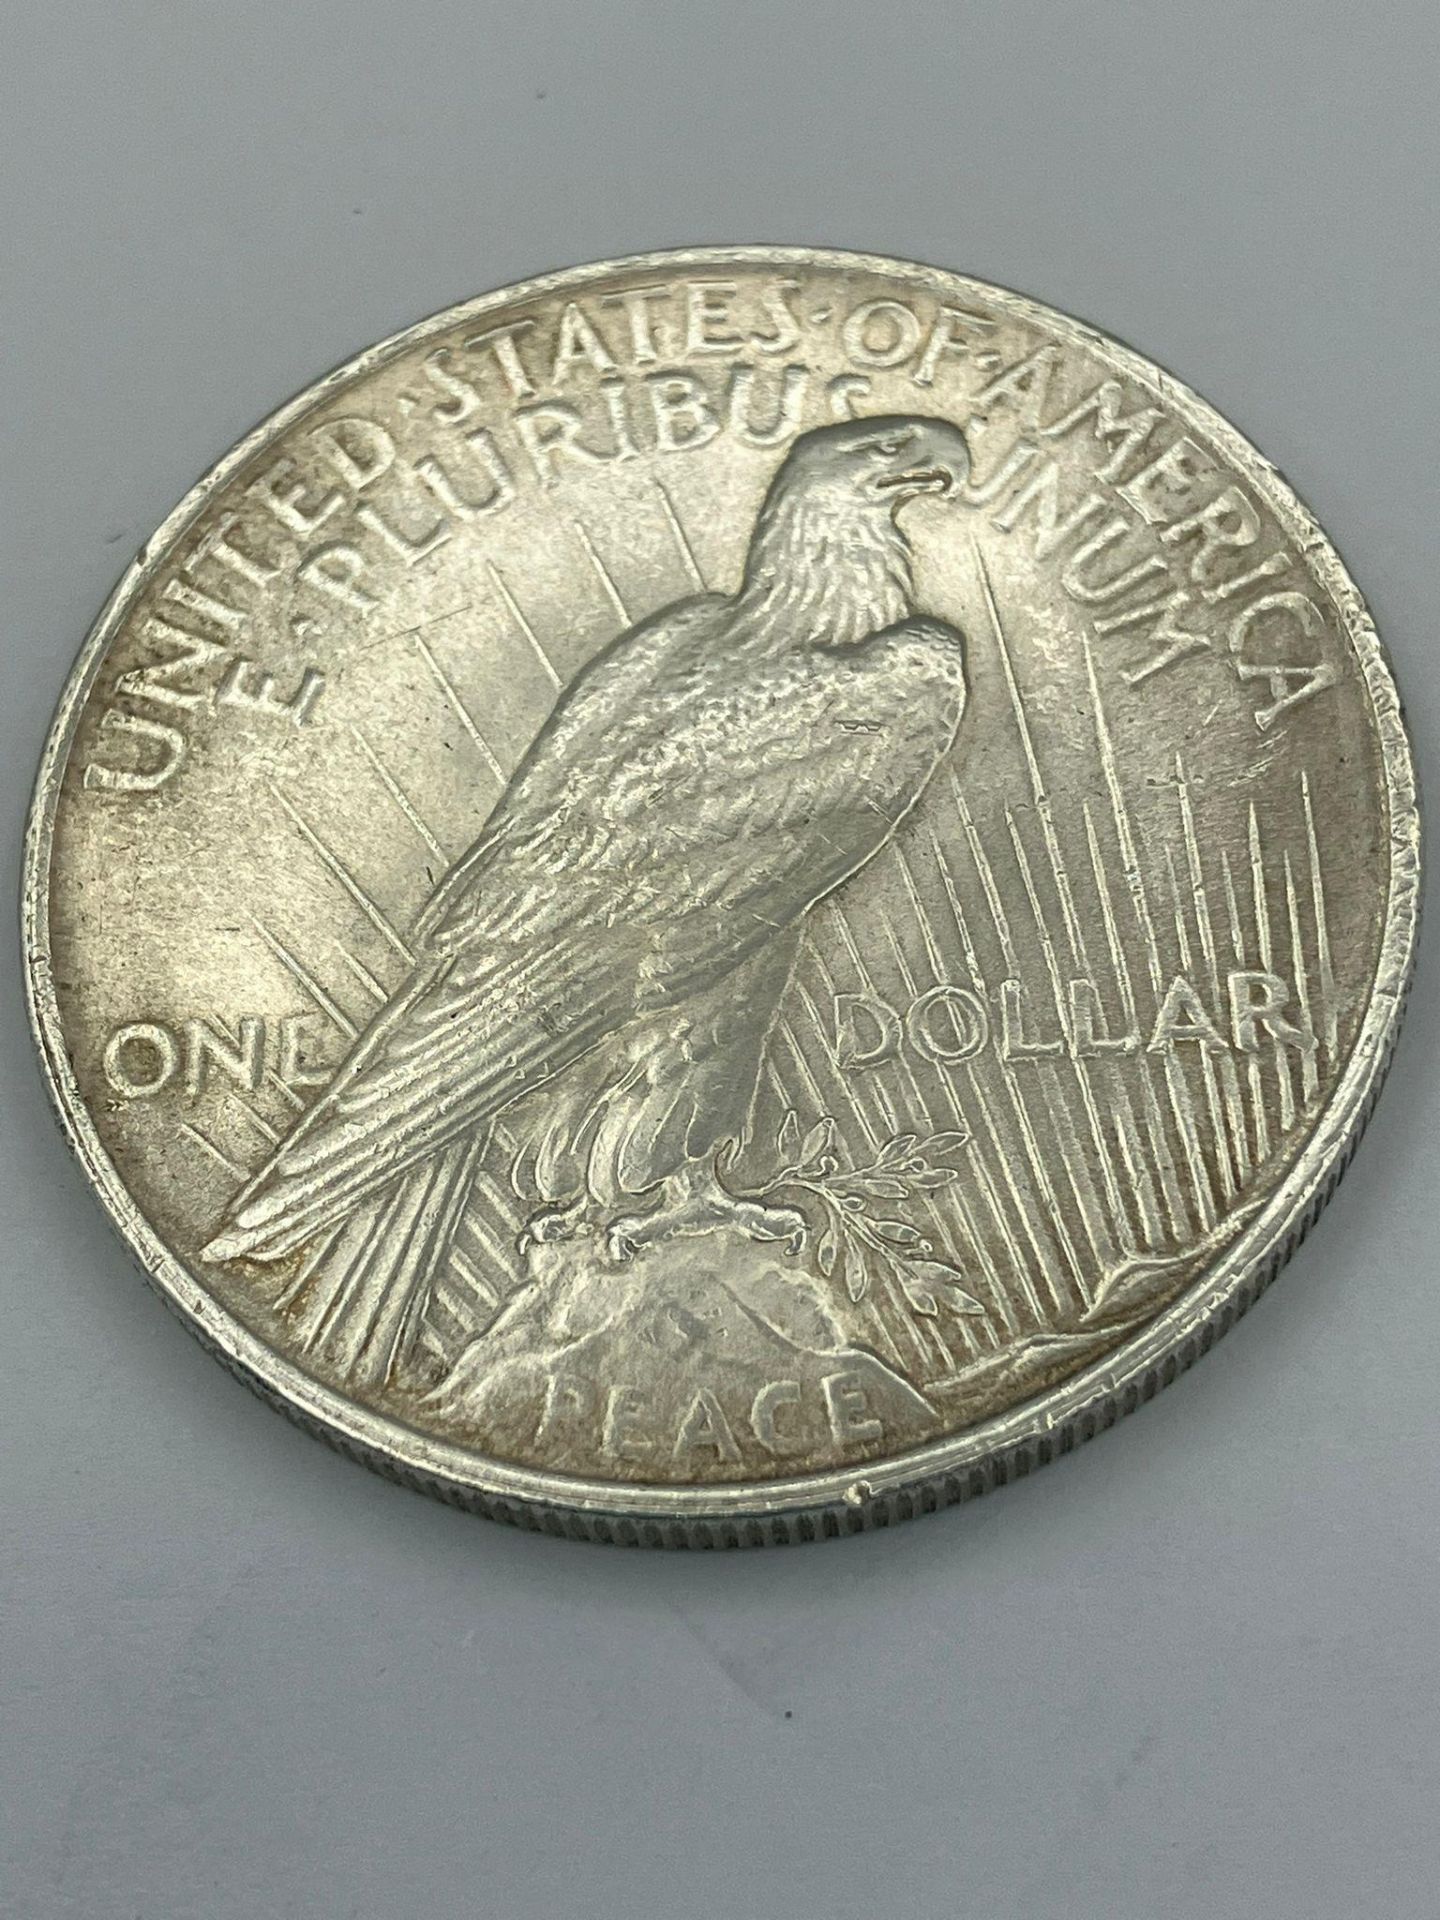 1922 USA SILVER PEACE DOLLAR. Very/extra fine condition. Please see picture. - Bild 2 aus 2